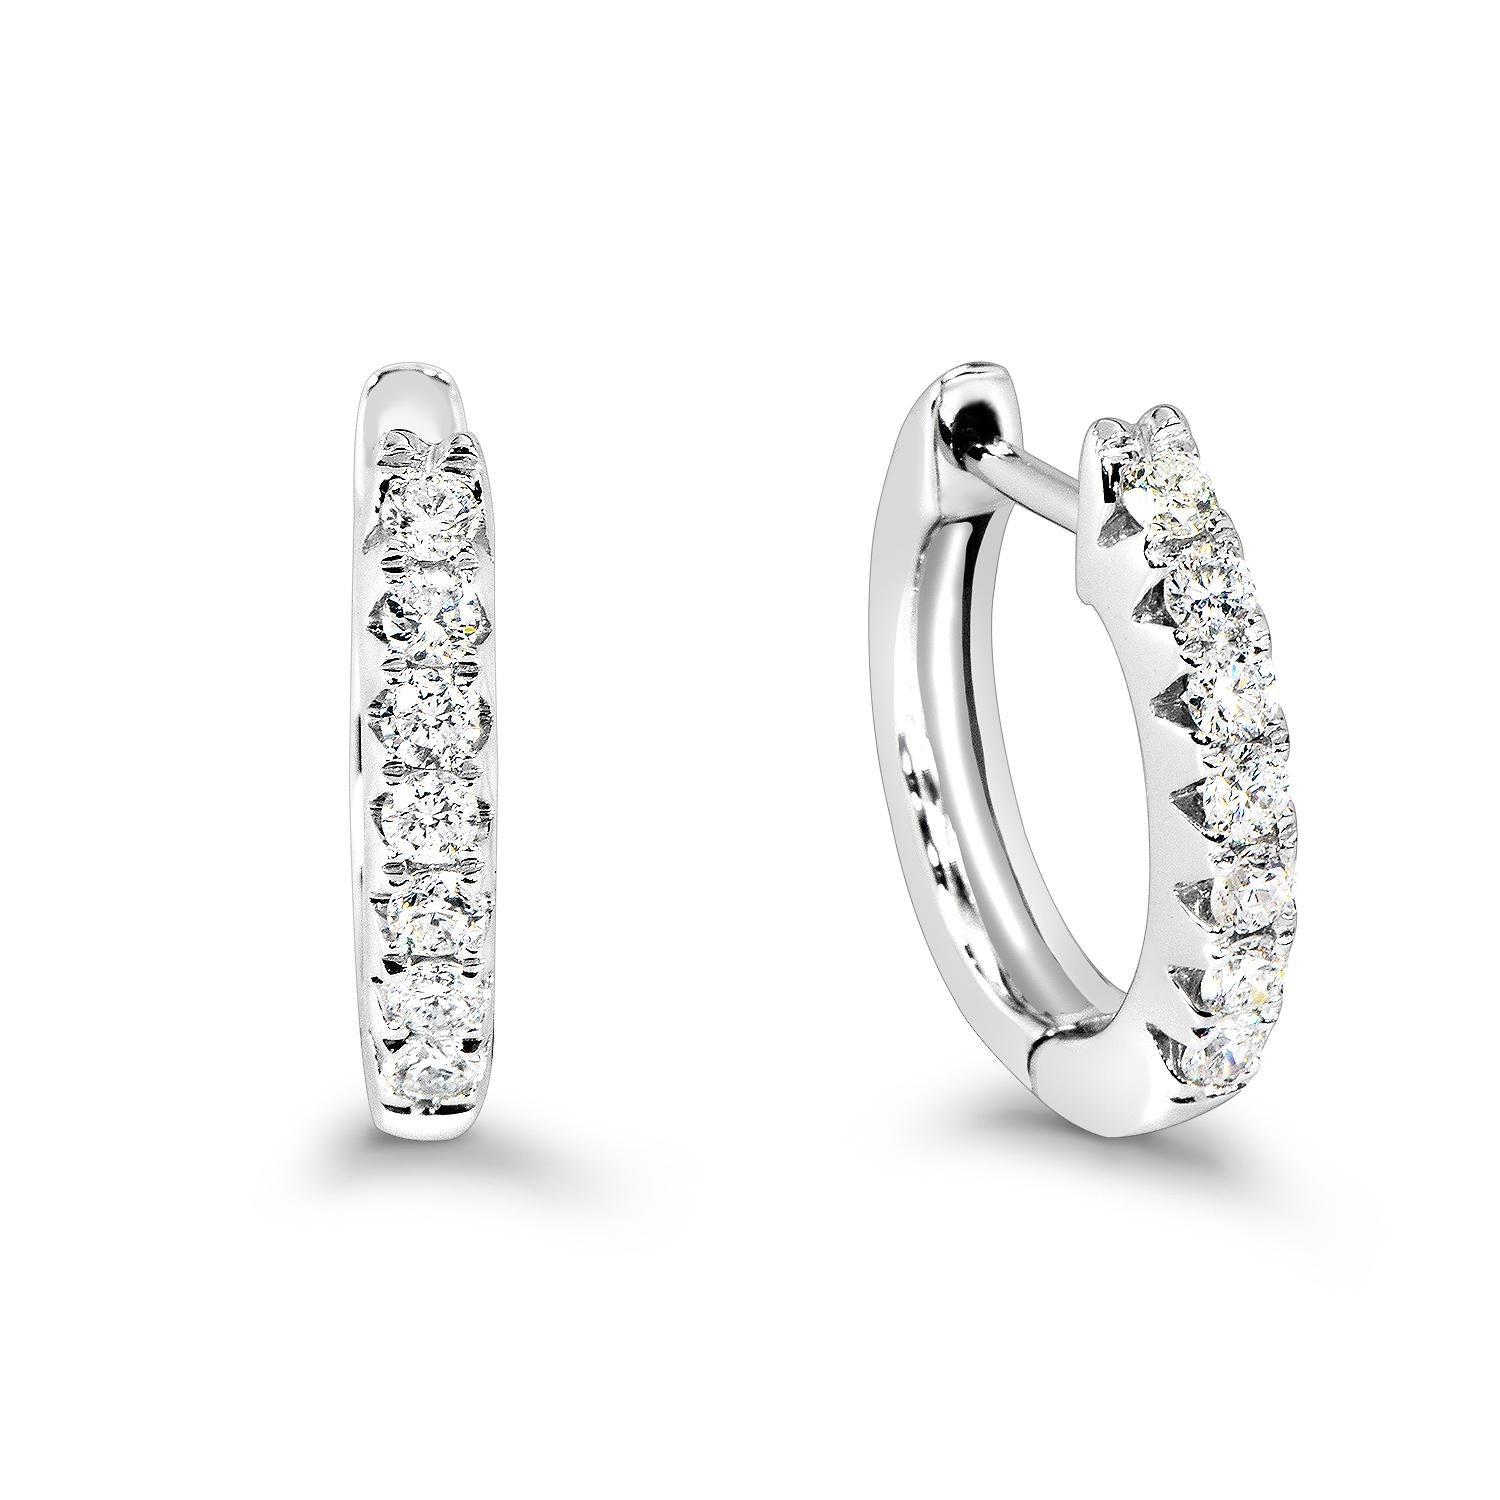 Ladies beautiful diamond hoop Huggy earrings.
Contains .96 carat round brilliant diamonds total weight
16 diamonds are handset in prong setting.
Total weight 3.12 grams,14k white gold.
This beautiful earrings can be worn everyday and for special